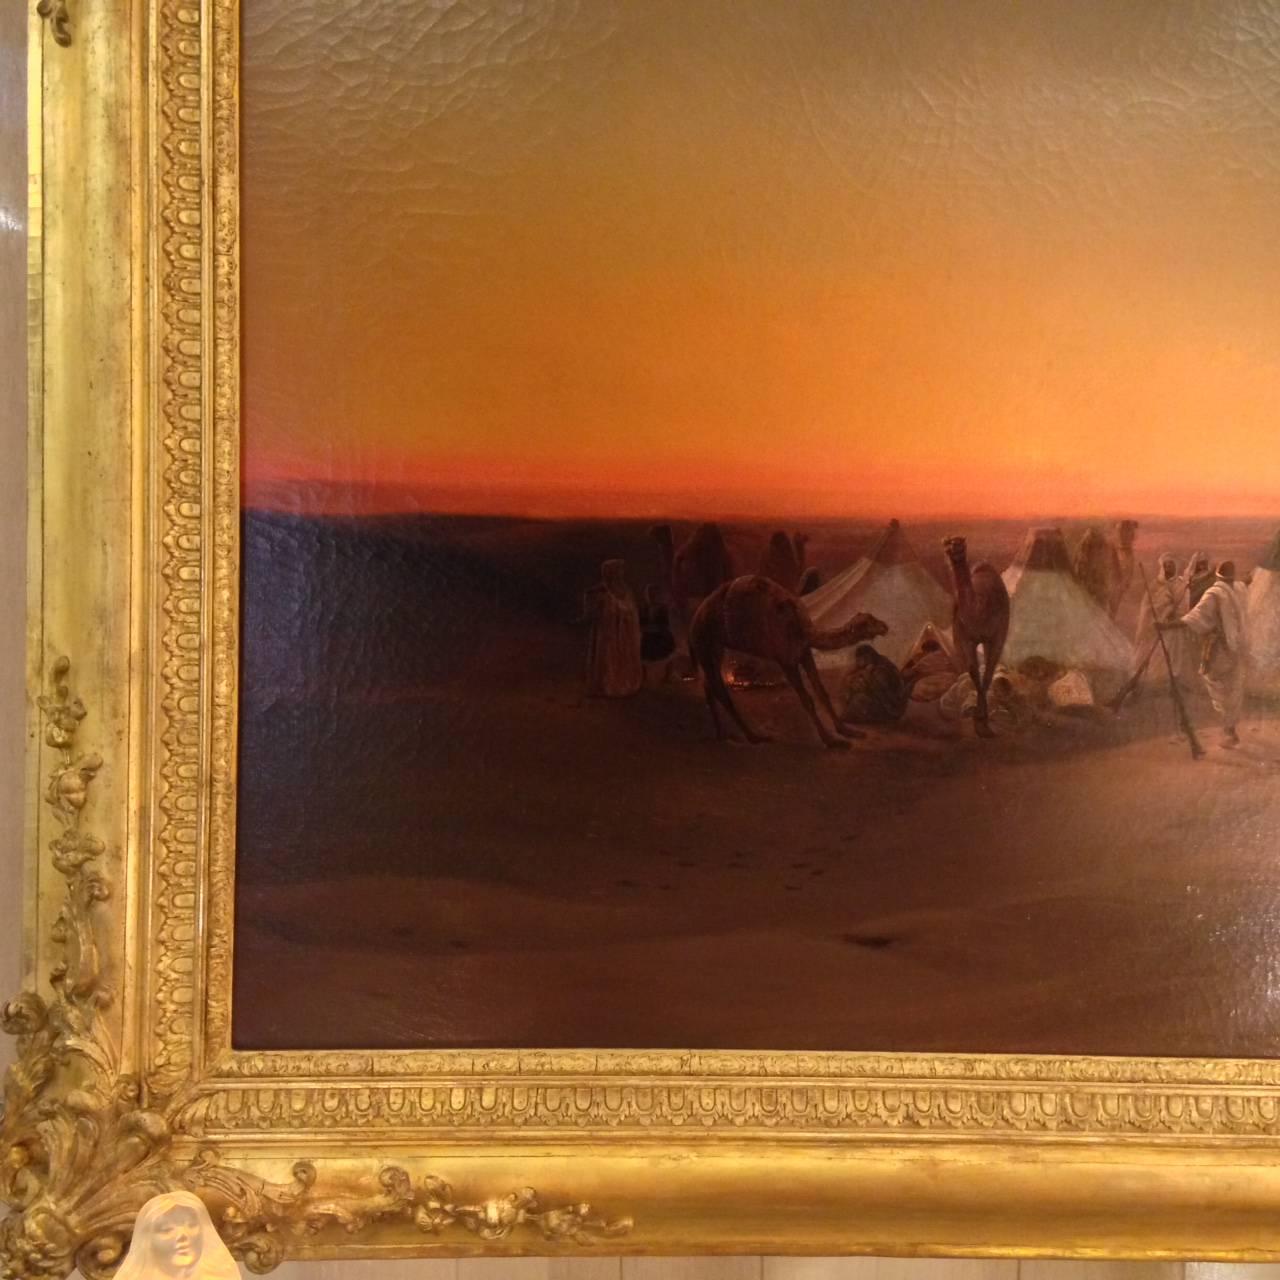 Very beautiful orientalist school of the late 19th century representing a Berber encampment attacked by lions at sunset.
Oil on canvas in perfect state on its original wood chassis.
No signature.
Original gilded wood frame.
Overall dimensions: